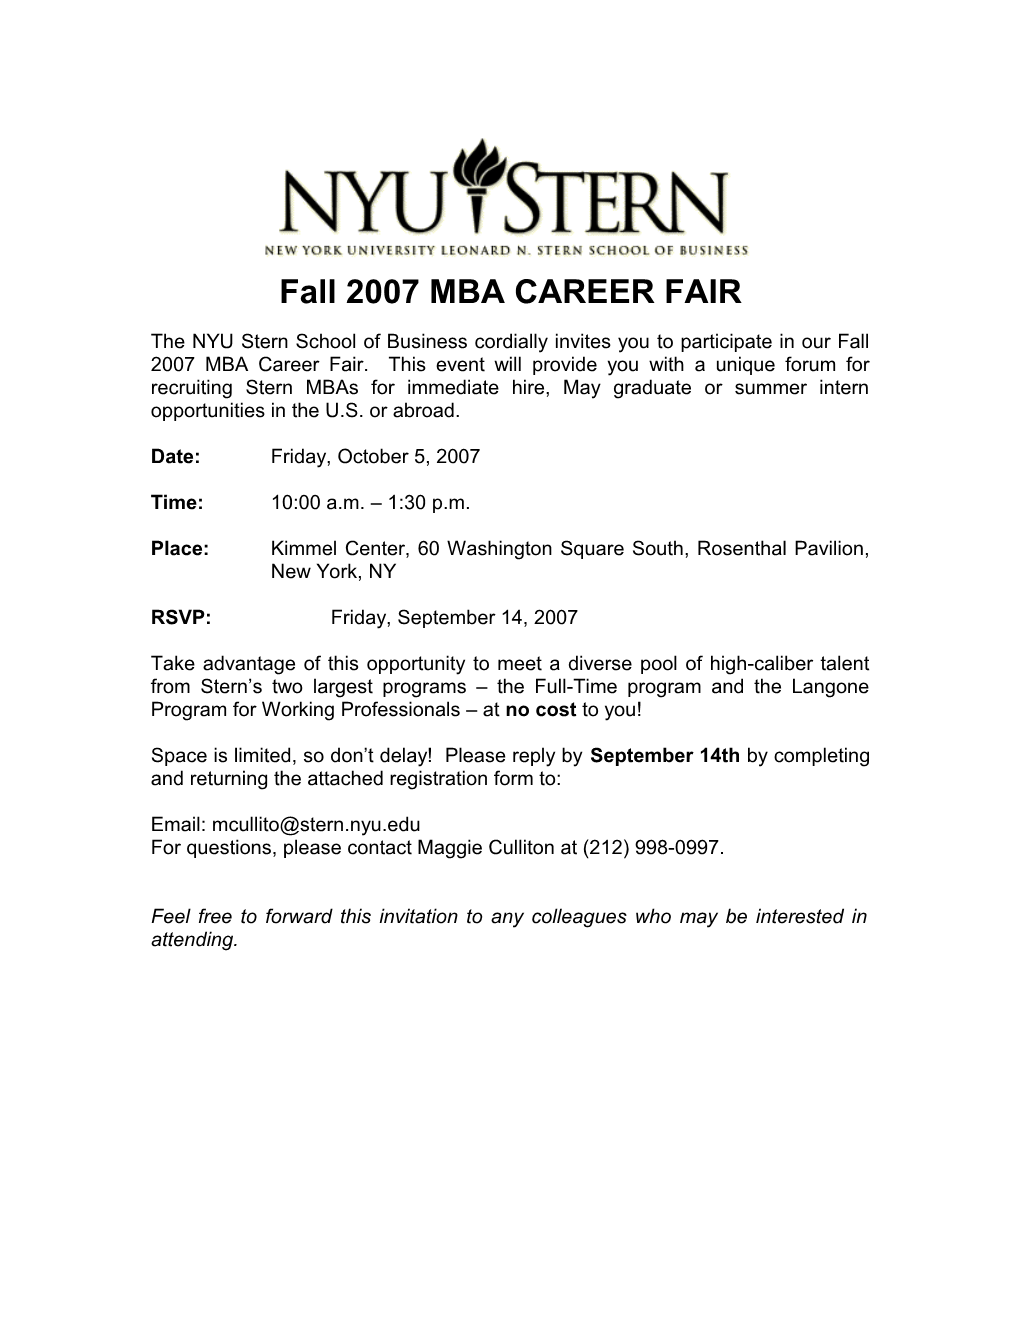 The NYU Stern School of Business Cordially Invites You to Participate in Our Spring 2005